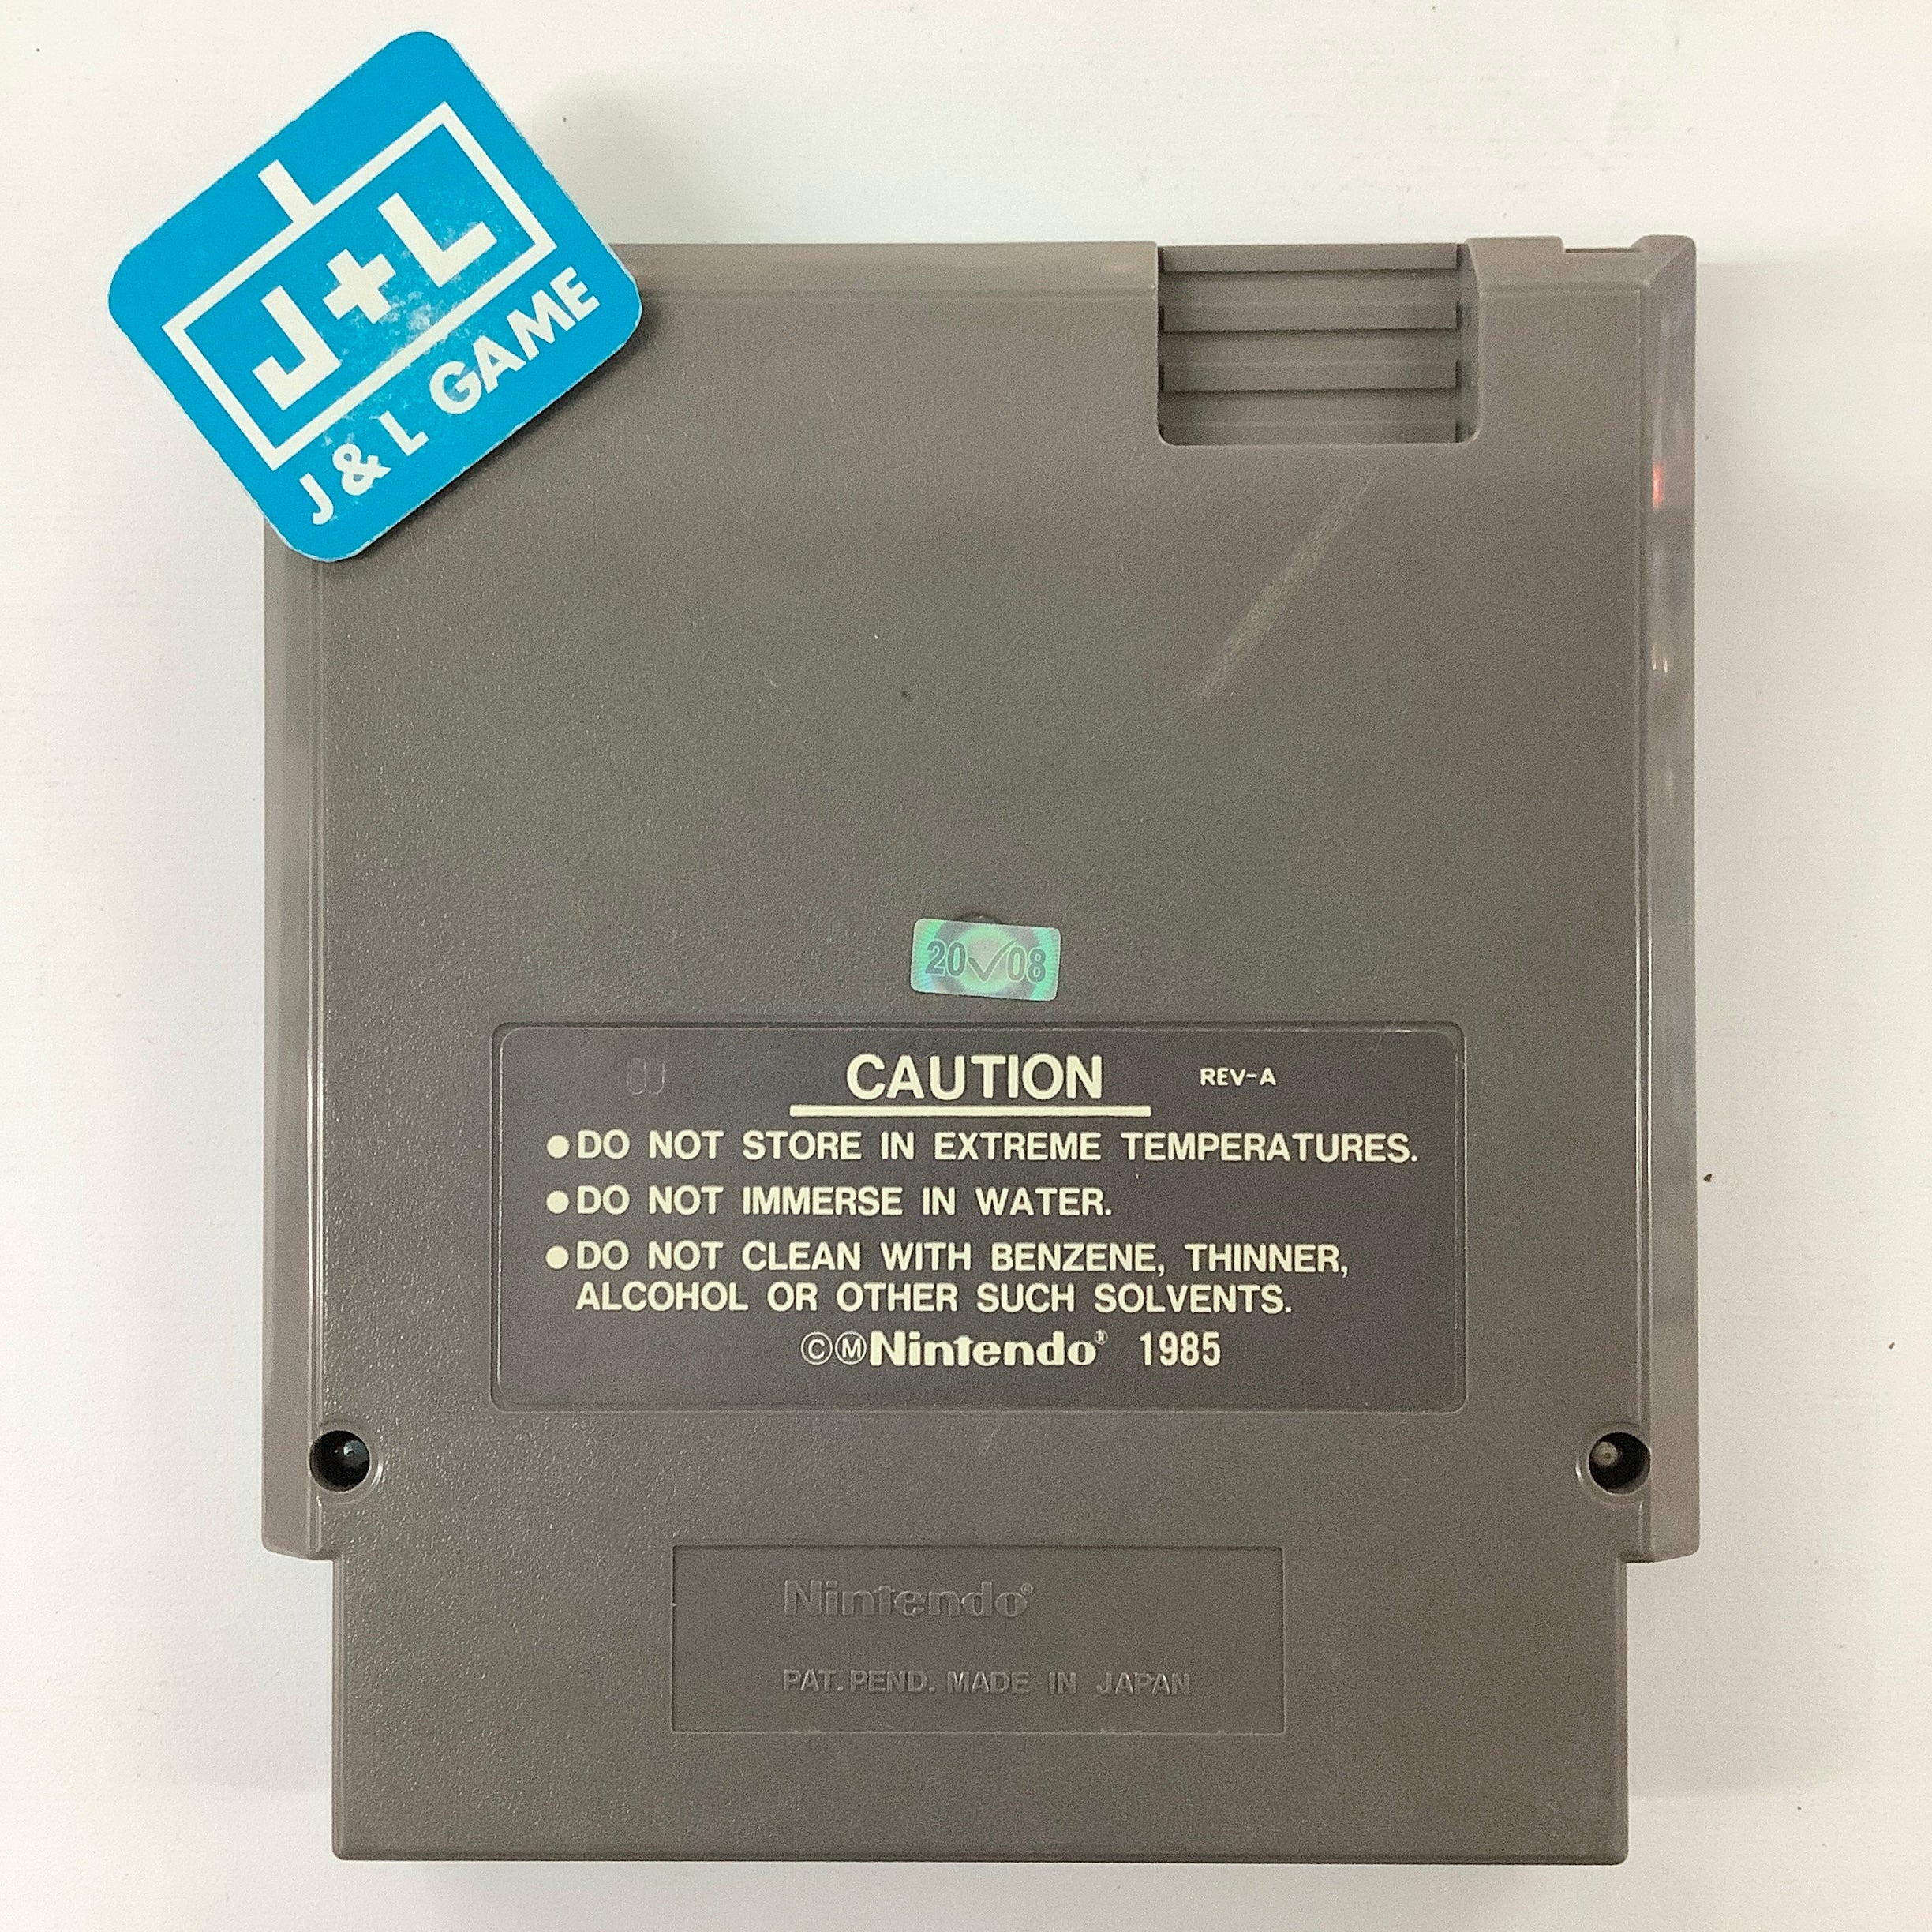 Seicross - (NES) Nintendo Entertainment System [Pre-Owned] Video Games FCI, Inc.   